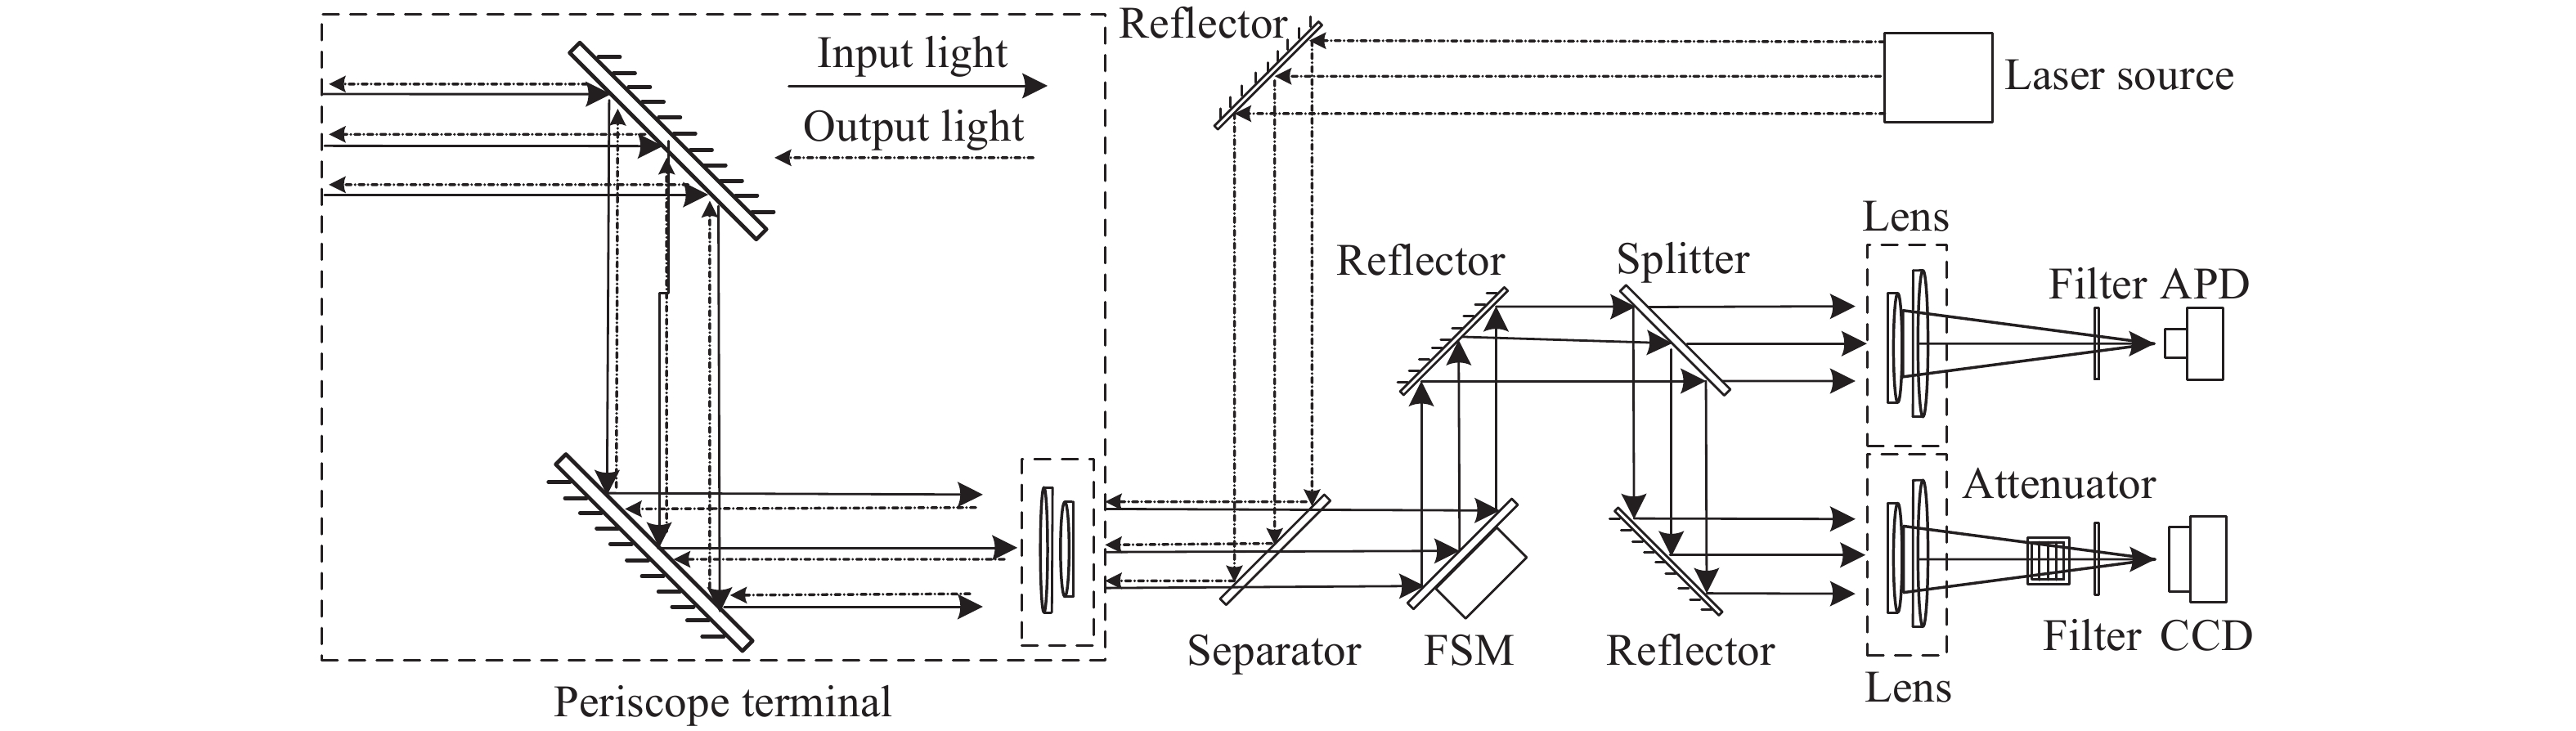 Structure diagram of receiver and transmitter for periscope laser communication system